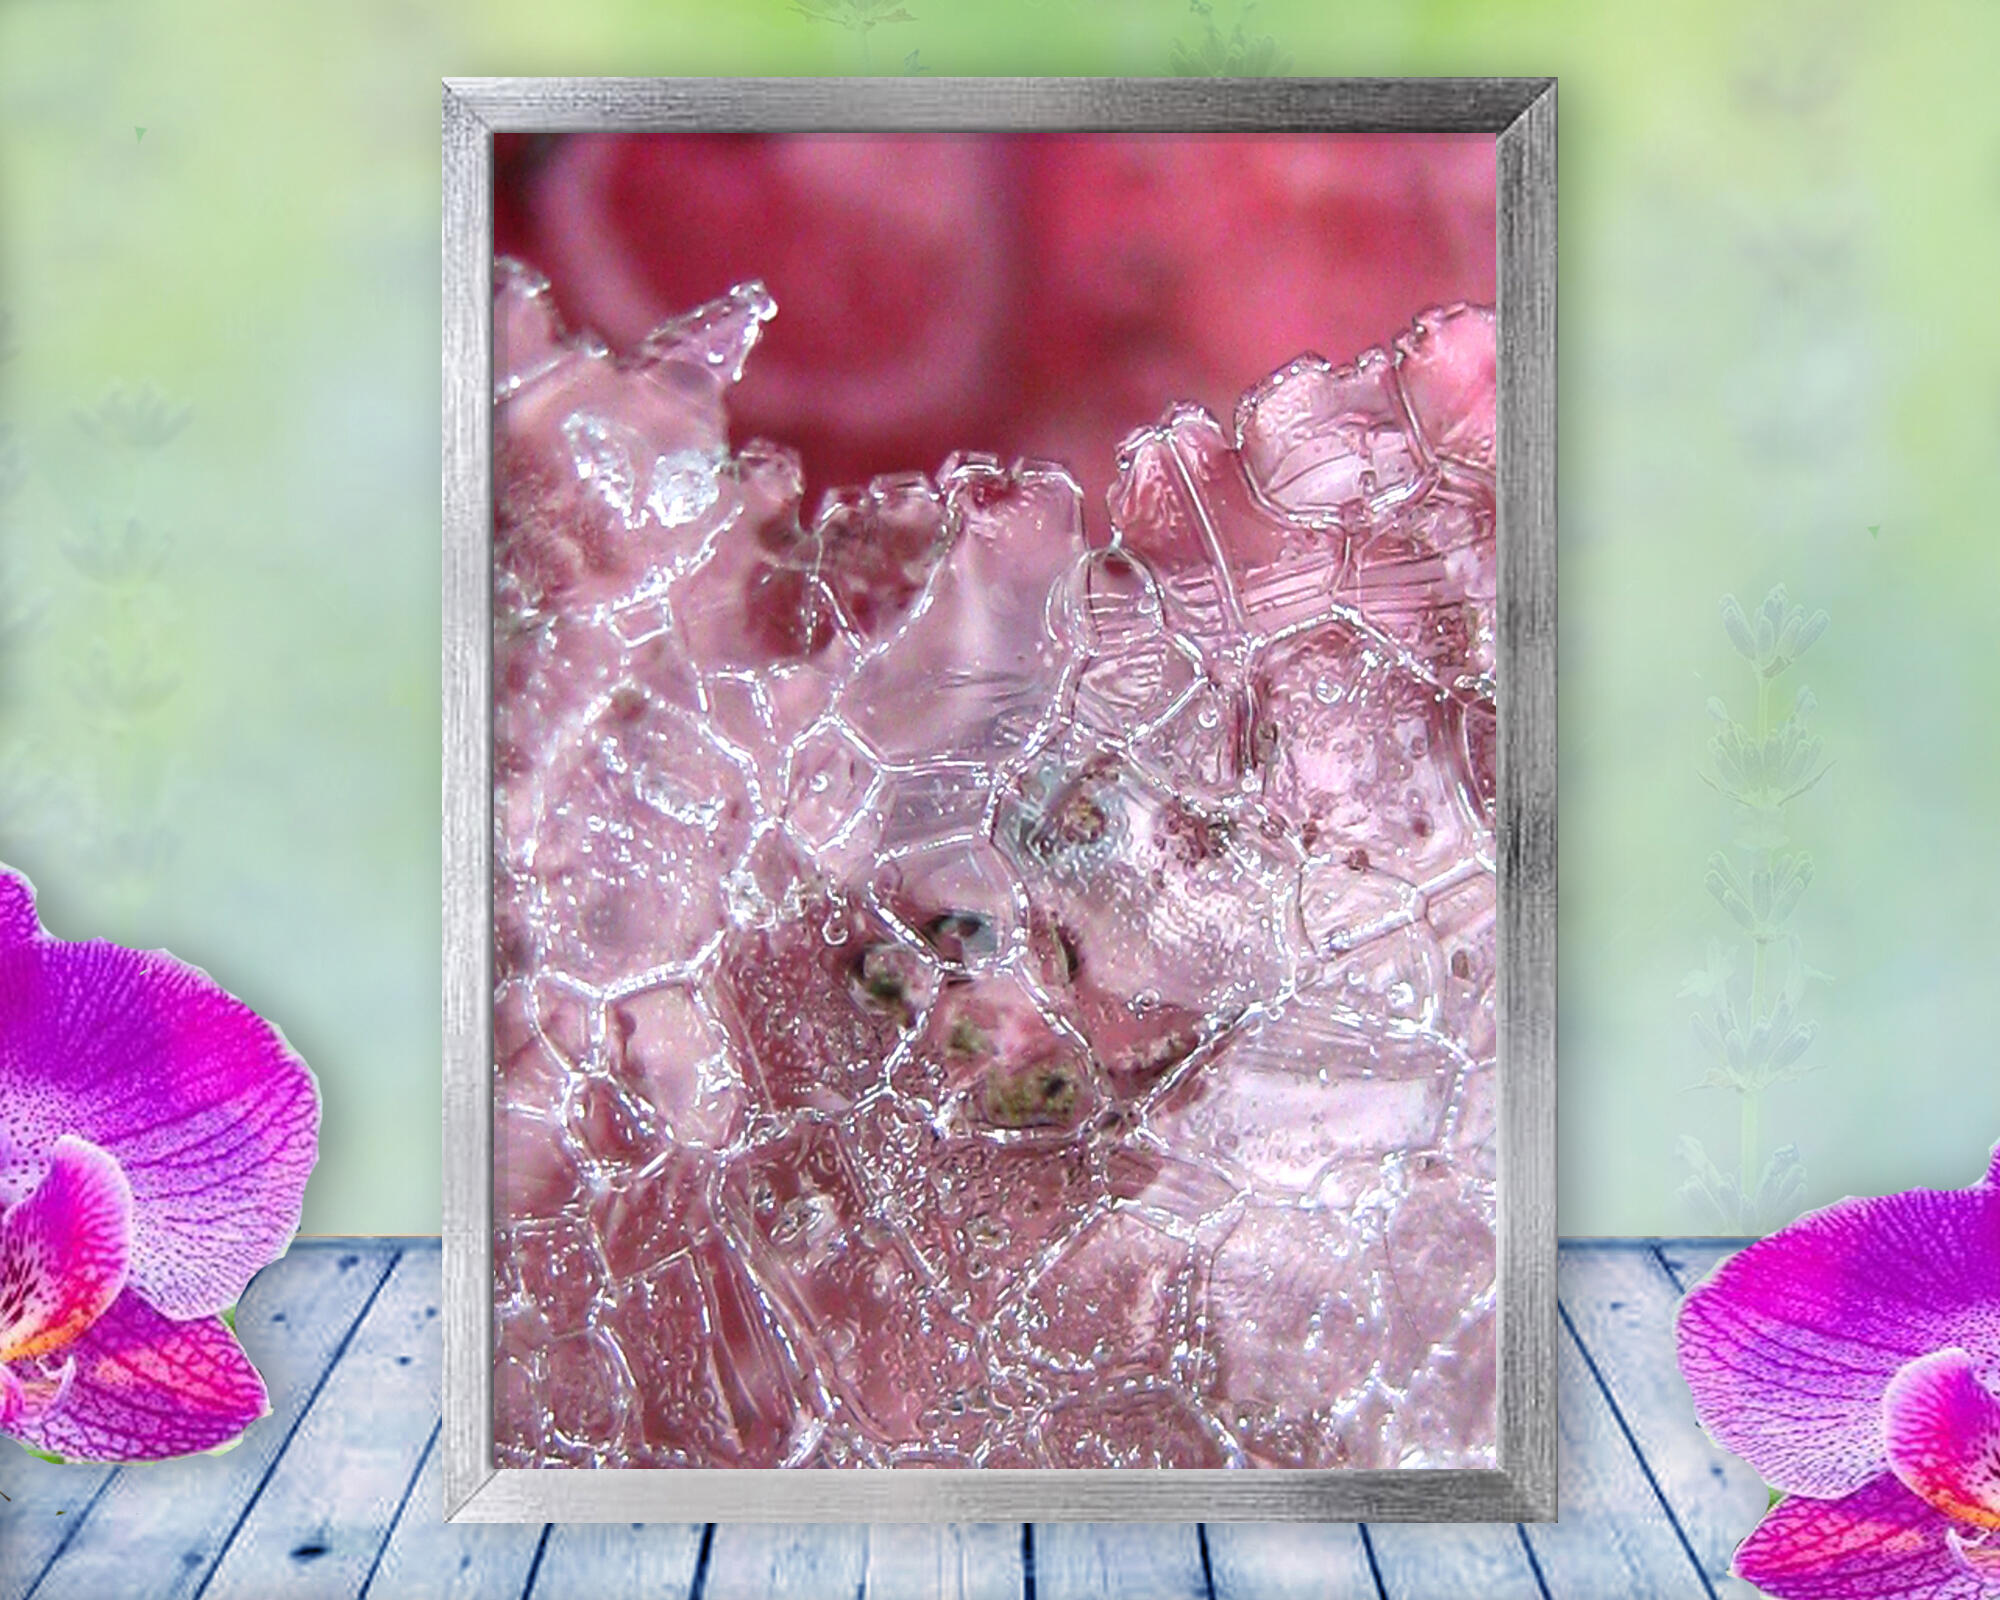 Crystals of Ice make a beautiful display in this gentle, peaceful, pink nature mosaic - Rose Ice by The Poetry of Nature